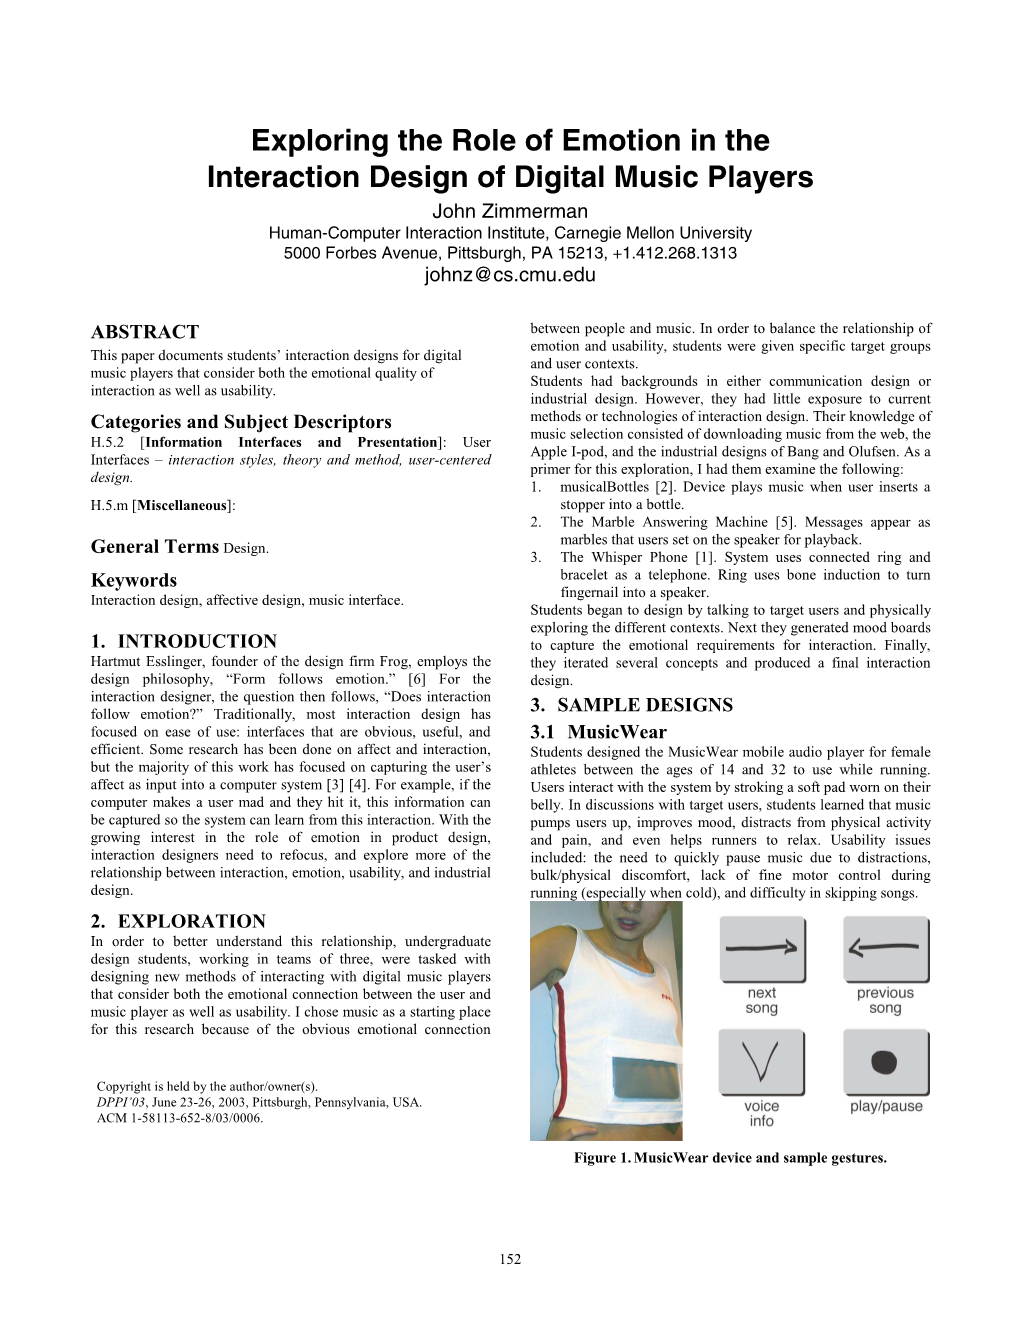 Exploring the Role of Emotion in the Interaction Design of Digital Music